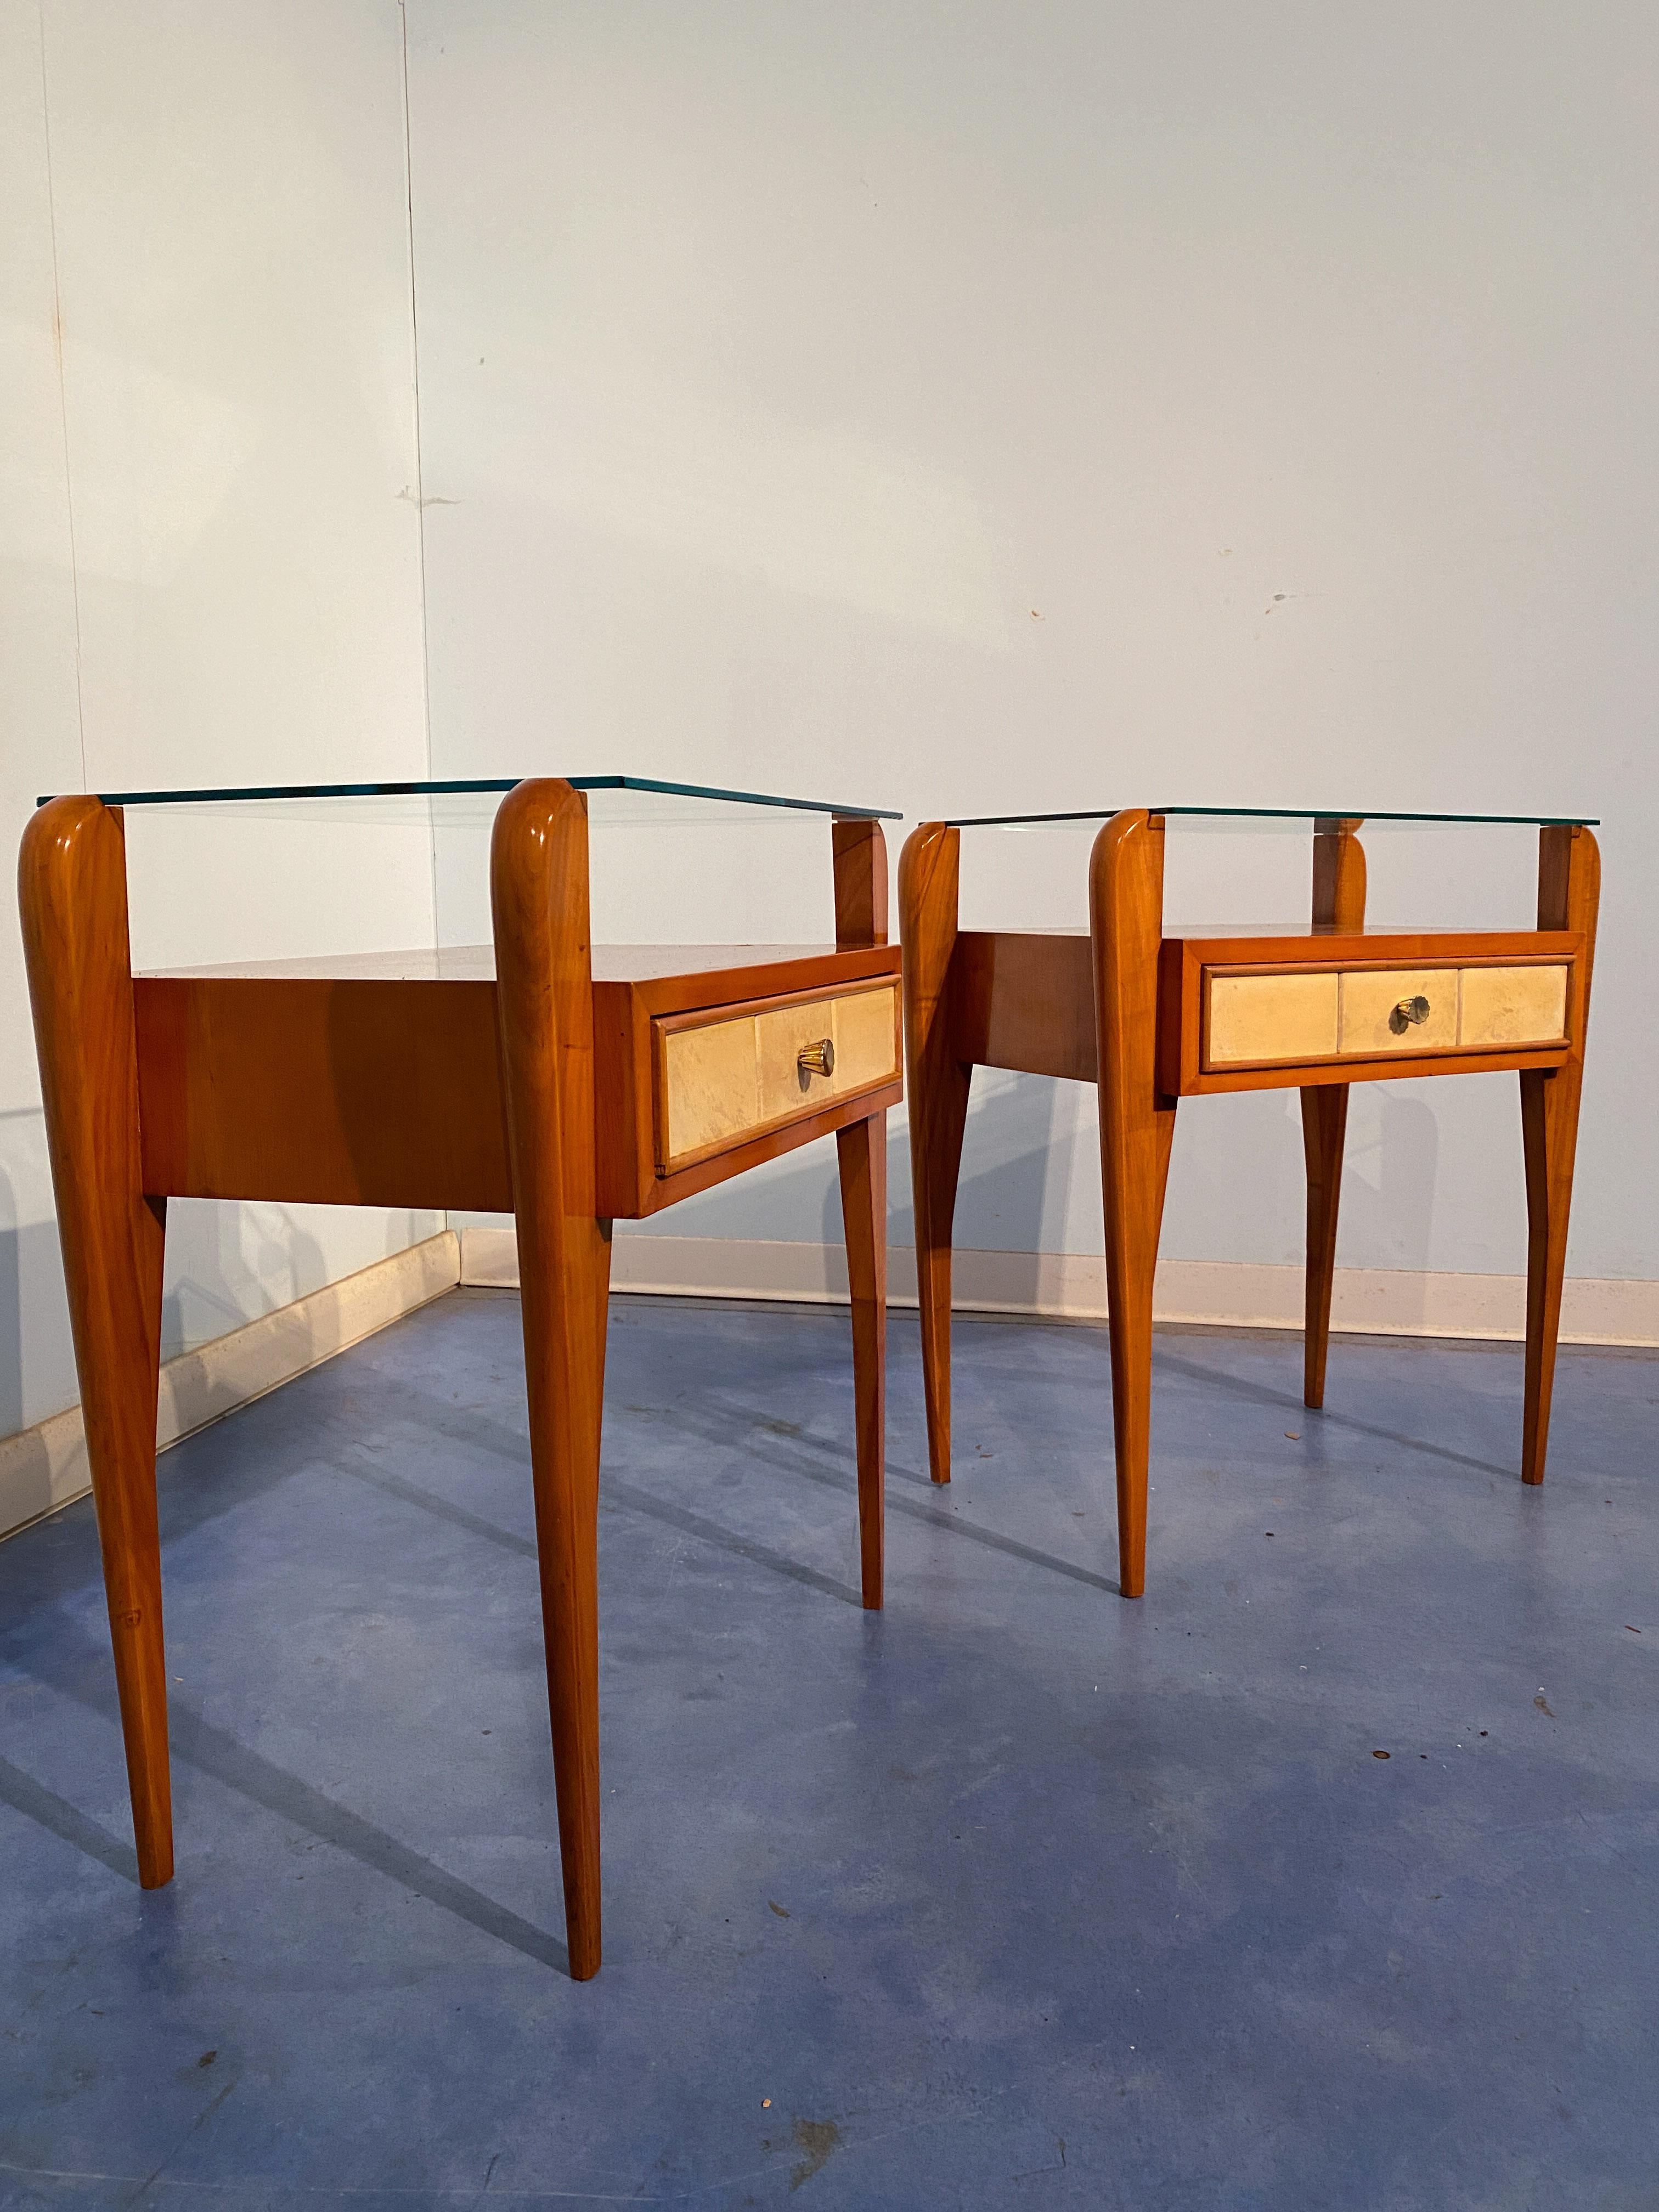 Mid-20th Century Italian Mid-Century Parchment Bedside or Nightstands by Osvaldo Borsani, 1950 For Sale